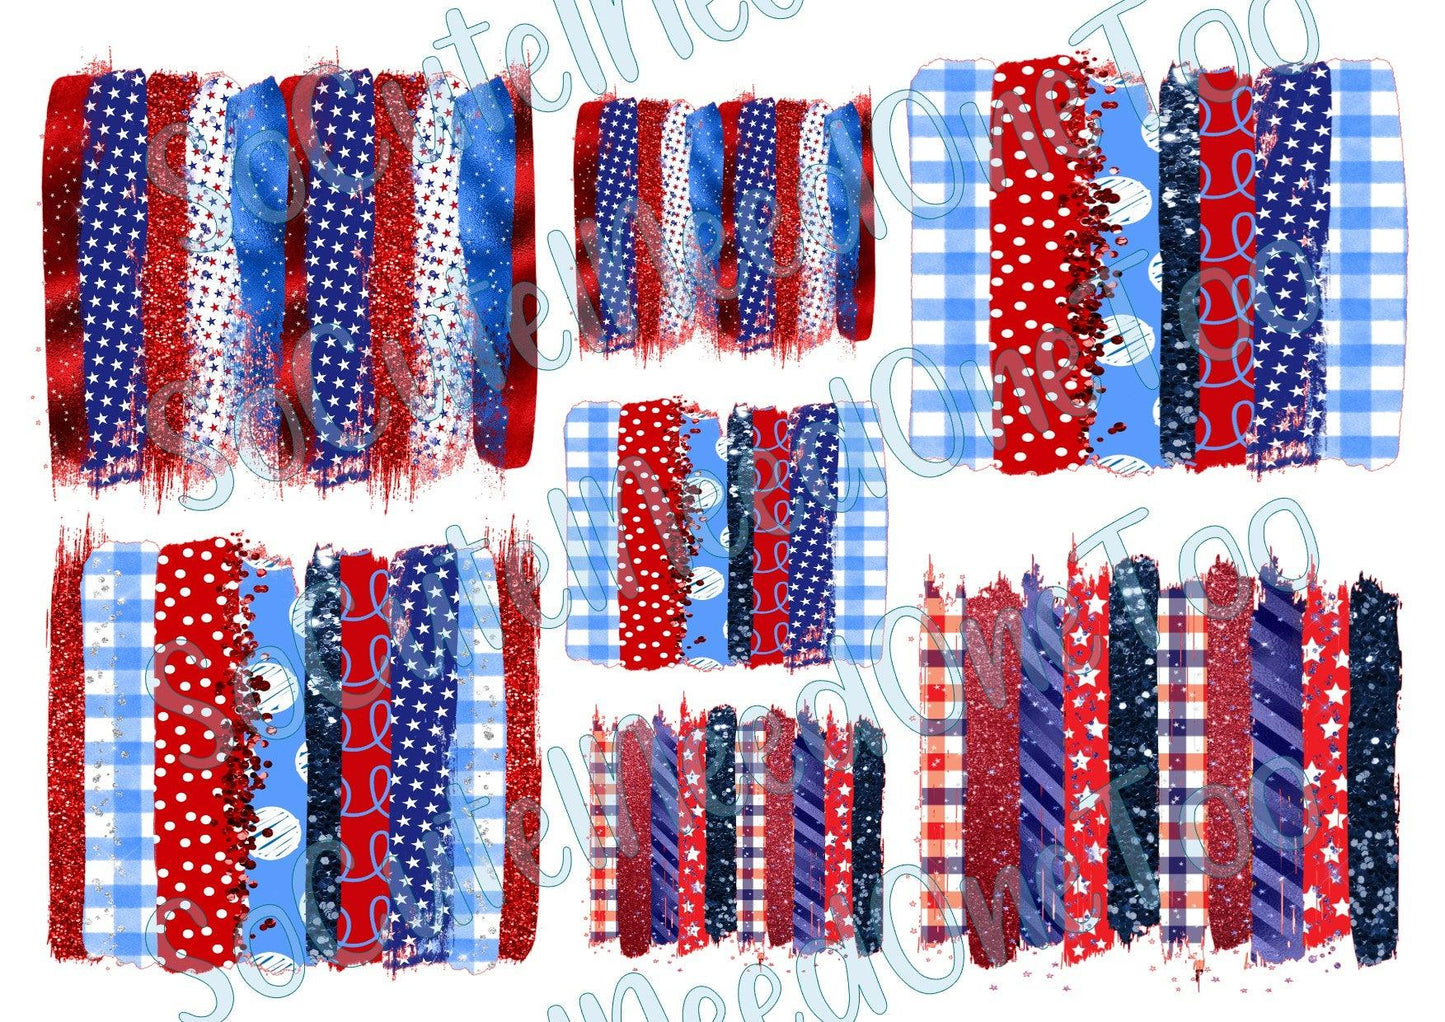 Patriotic Backgrounds on Clear/White Waterslide Paper Ready To Use - SoCuteINeedOneToo